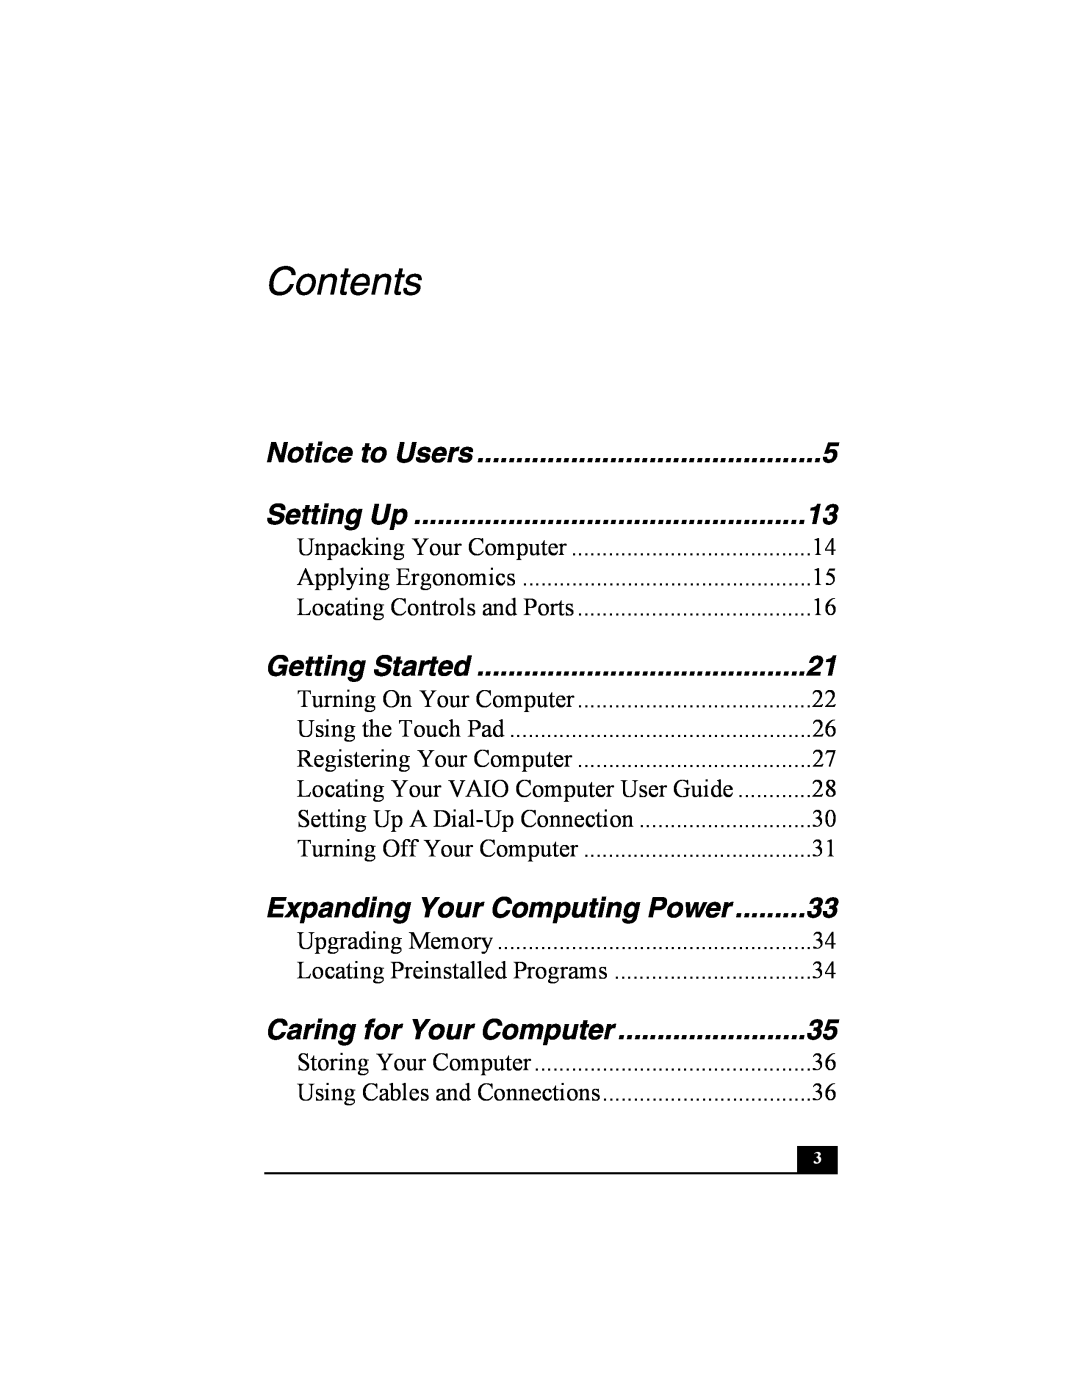 Sony PCG-FRV manual Contents, Setting Up, Getting Started, Expanding Your Computing Power, Caring for Your Computer 